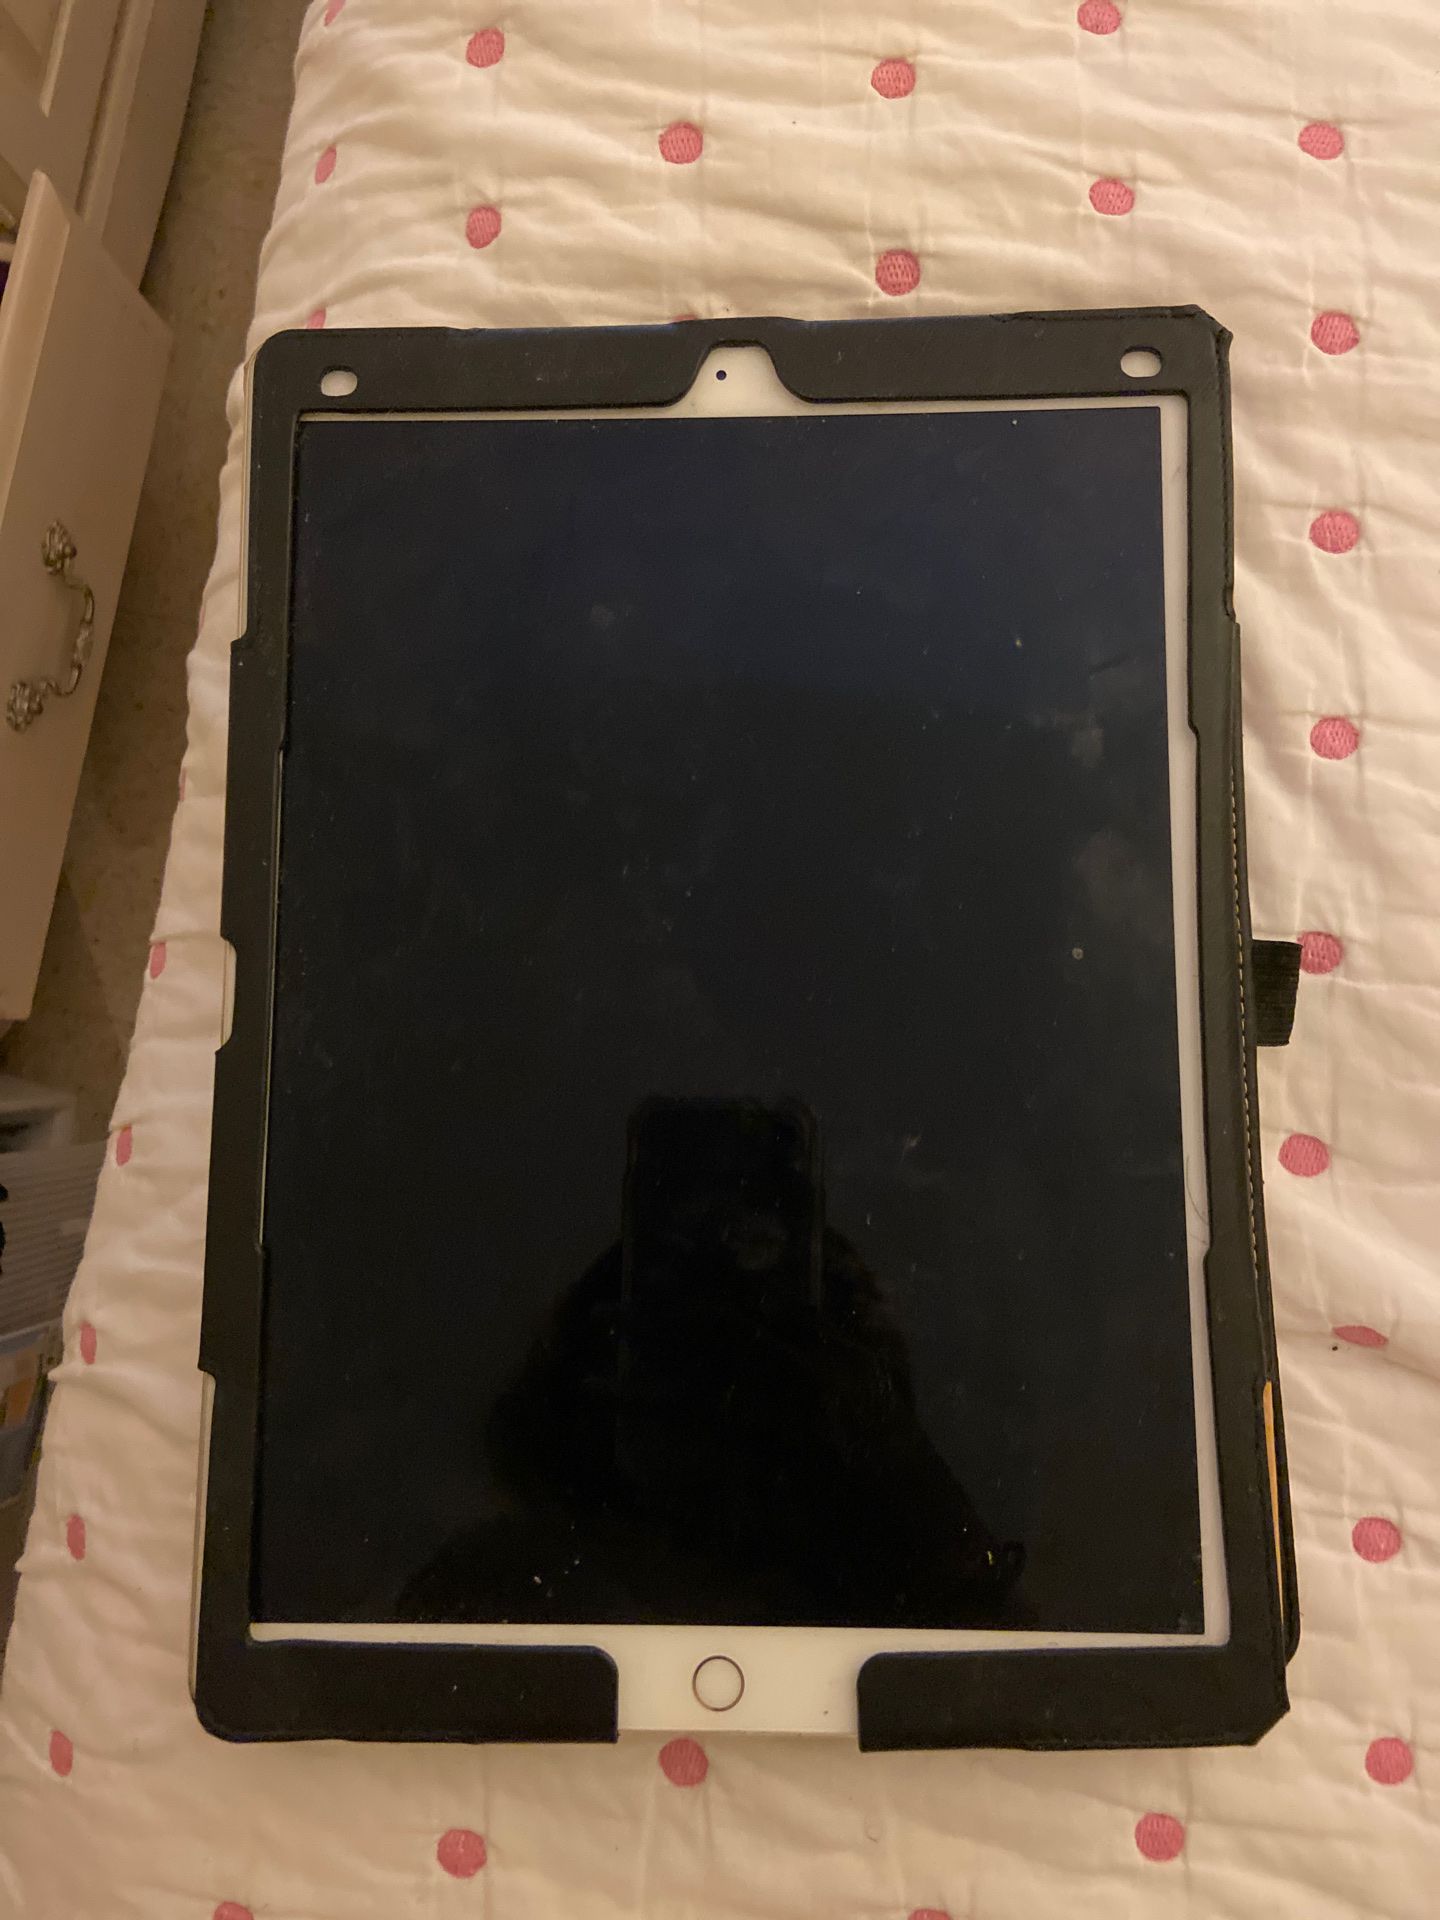 2017 IPad Pro with case and Charger